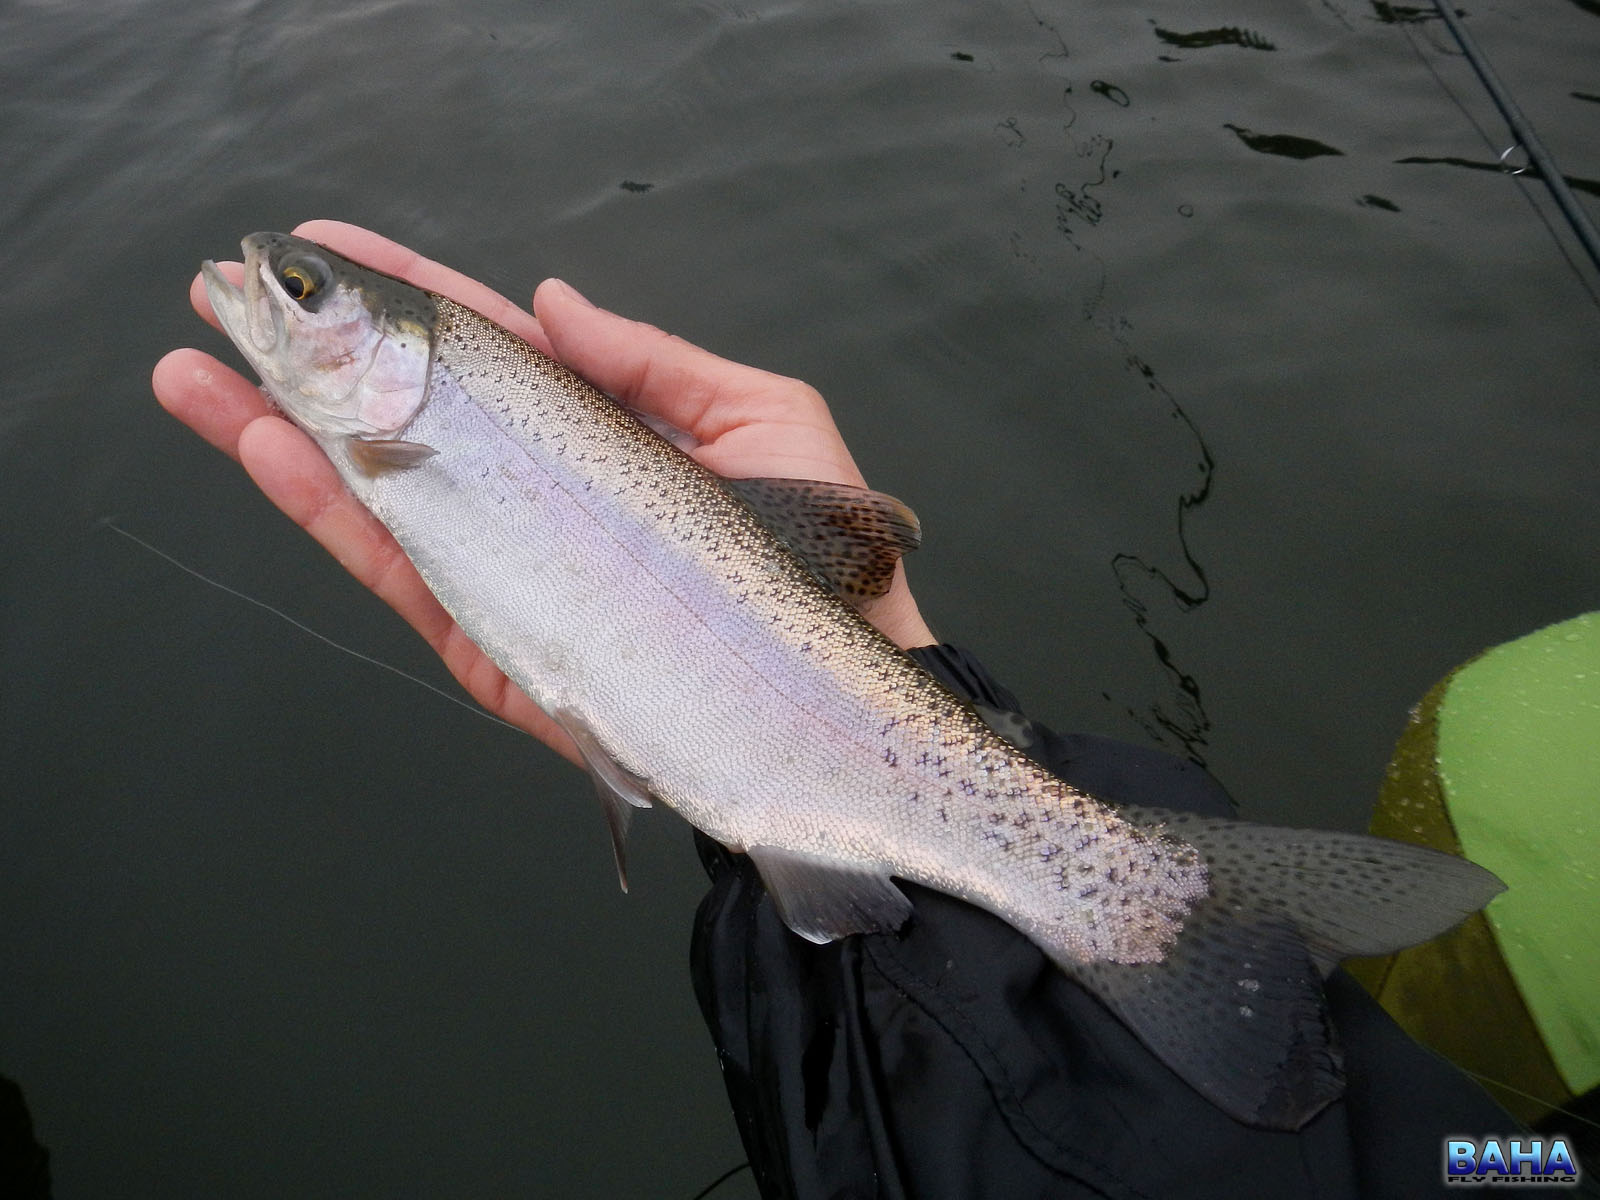 A small rainbow trout